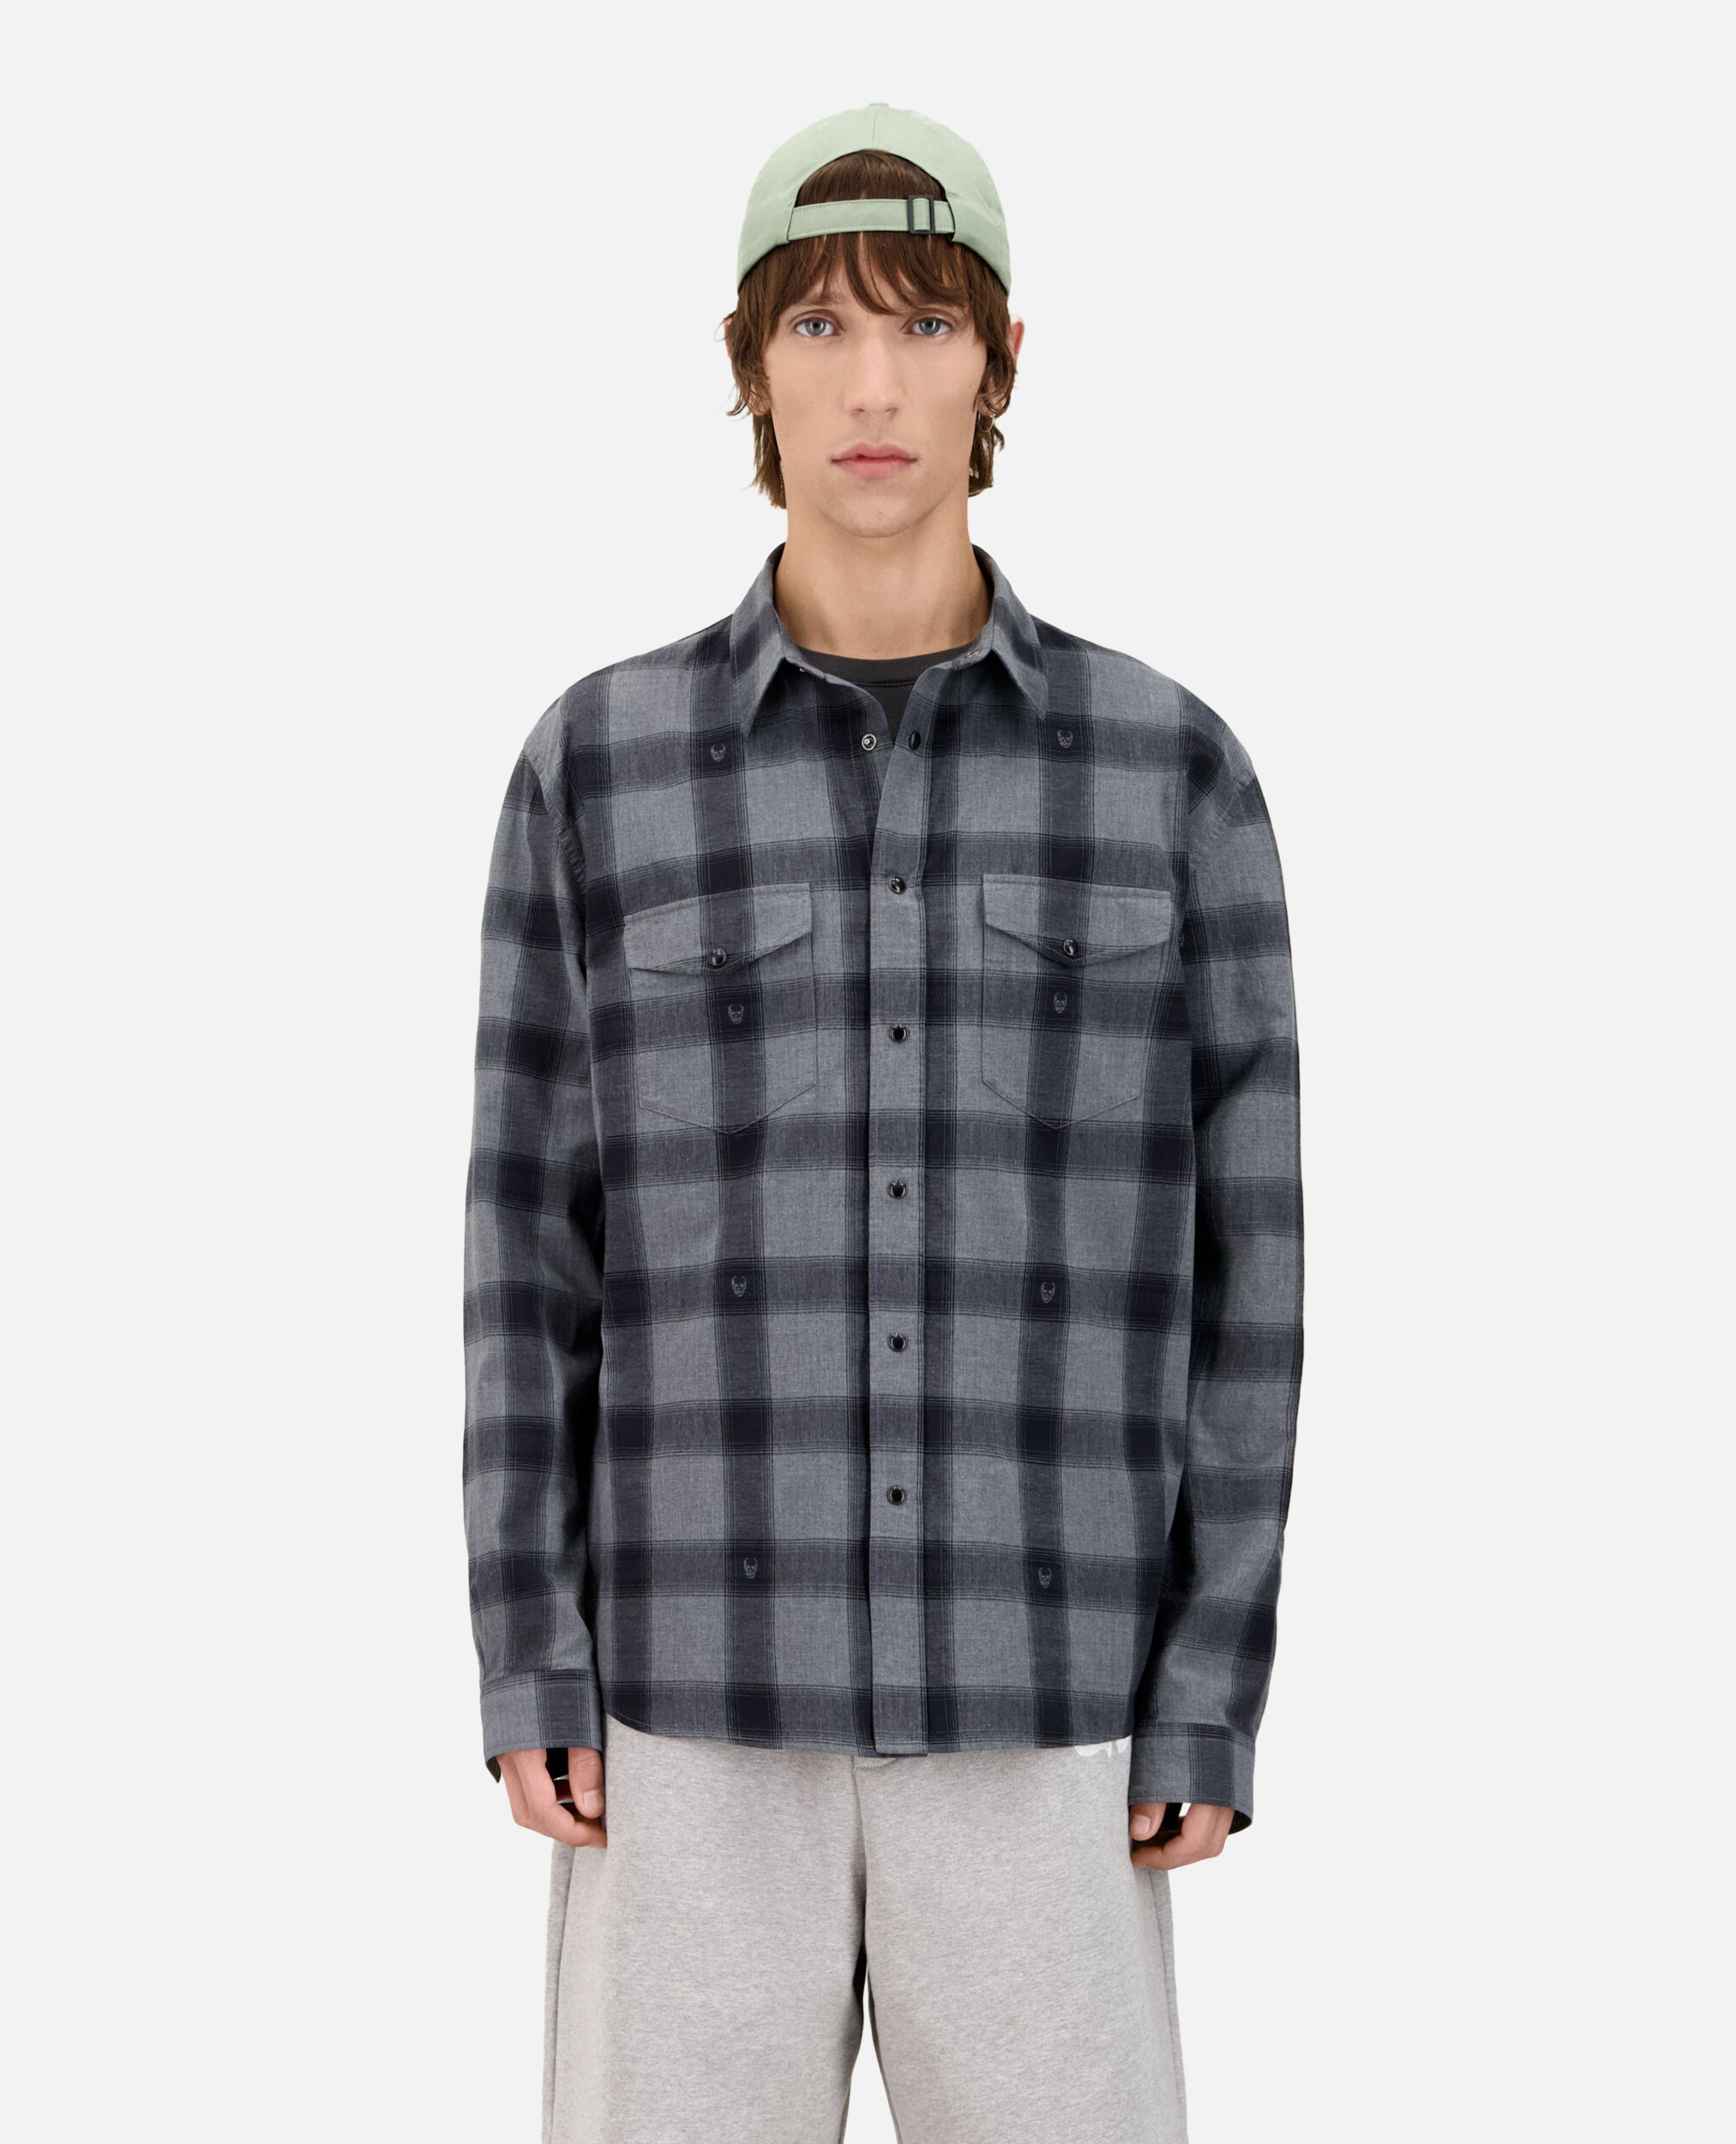 Grey checked shirt with skulls, BLACK GREY, hi-res image number null